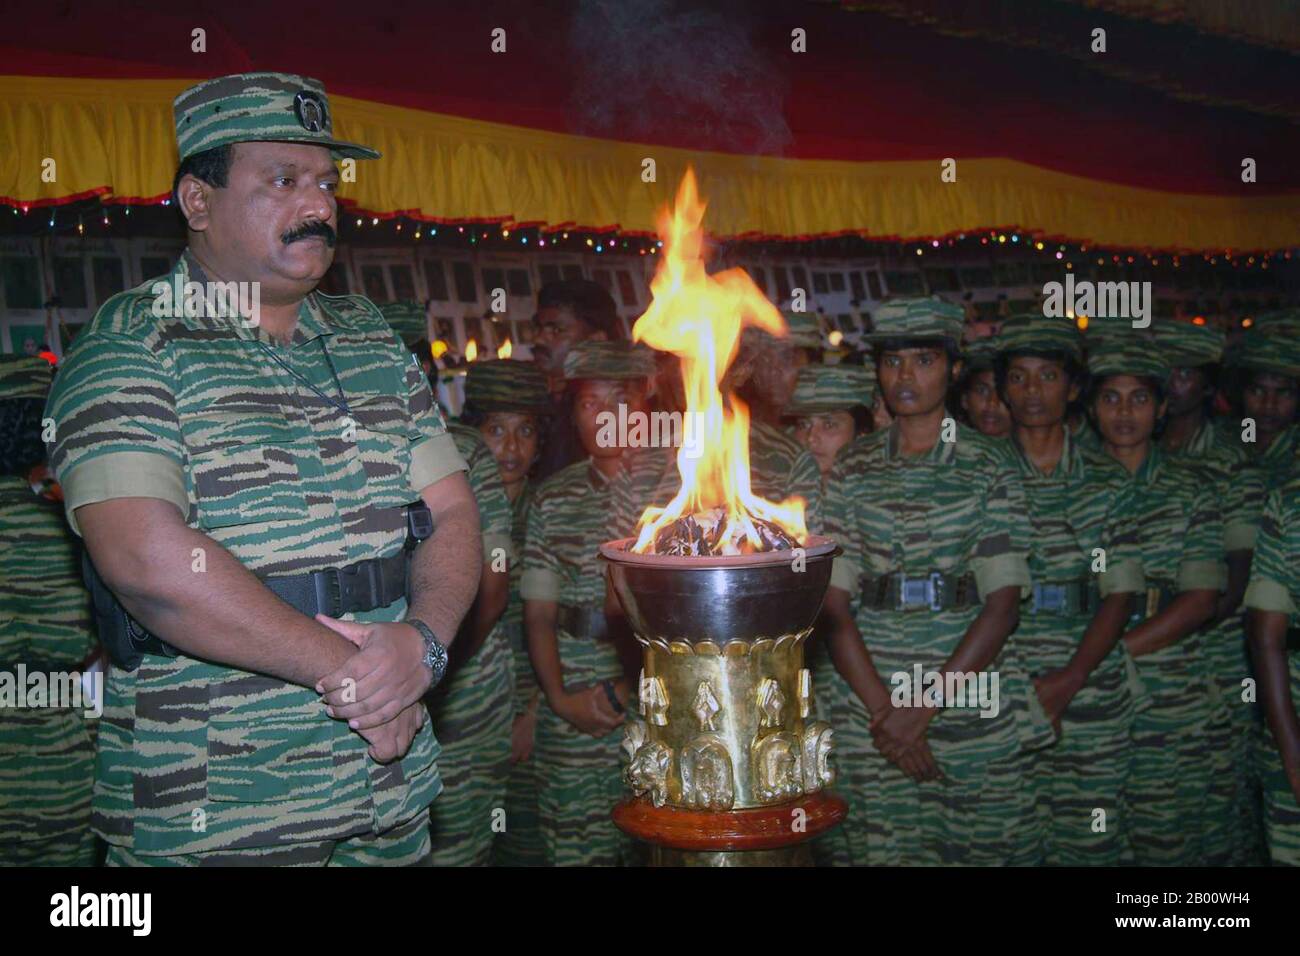 Sri Lanka: Liberation Tigers of Tamil Eelam (LTTE) leader Velupillai Prabhakaran before a flaming urn at a ceremony with female LTTE troops, c. 2006.  The Sri Lankan Civil War began on July 23, 1983, and quickly developed into an on-and-off insurgency against the Colombo government by the Liberation Tigers of Tamil Eelam (LTTE), commonly known as the Tamil Tigers, and other few rebel groups, which were fighting to create an independent Tamil state named Tamil Eelam in the north and the east of the island. After a 26-year military campaign, the Sri Lankan military defeated the LTTE in May 2009. Stock Photo